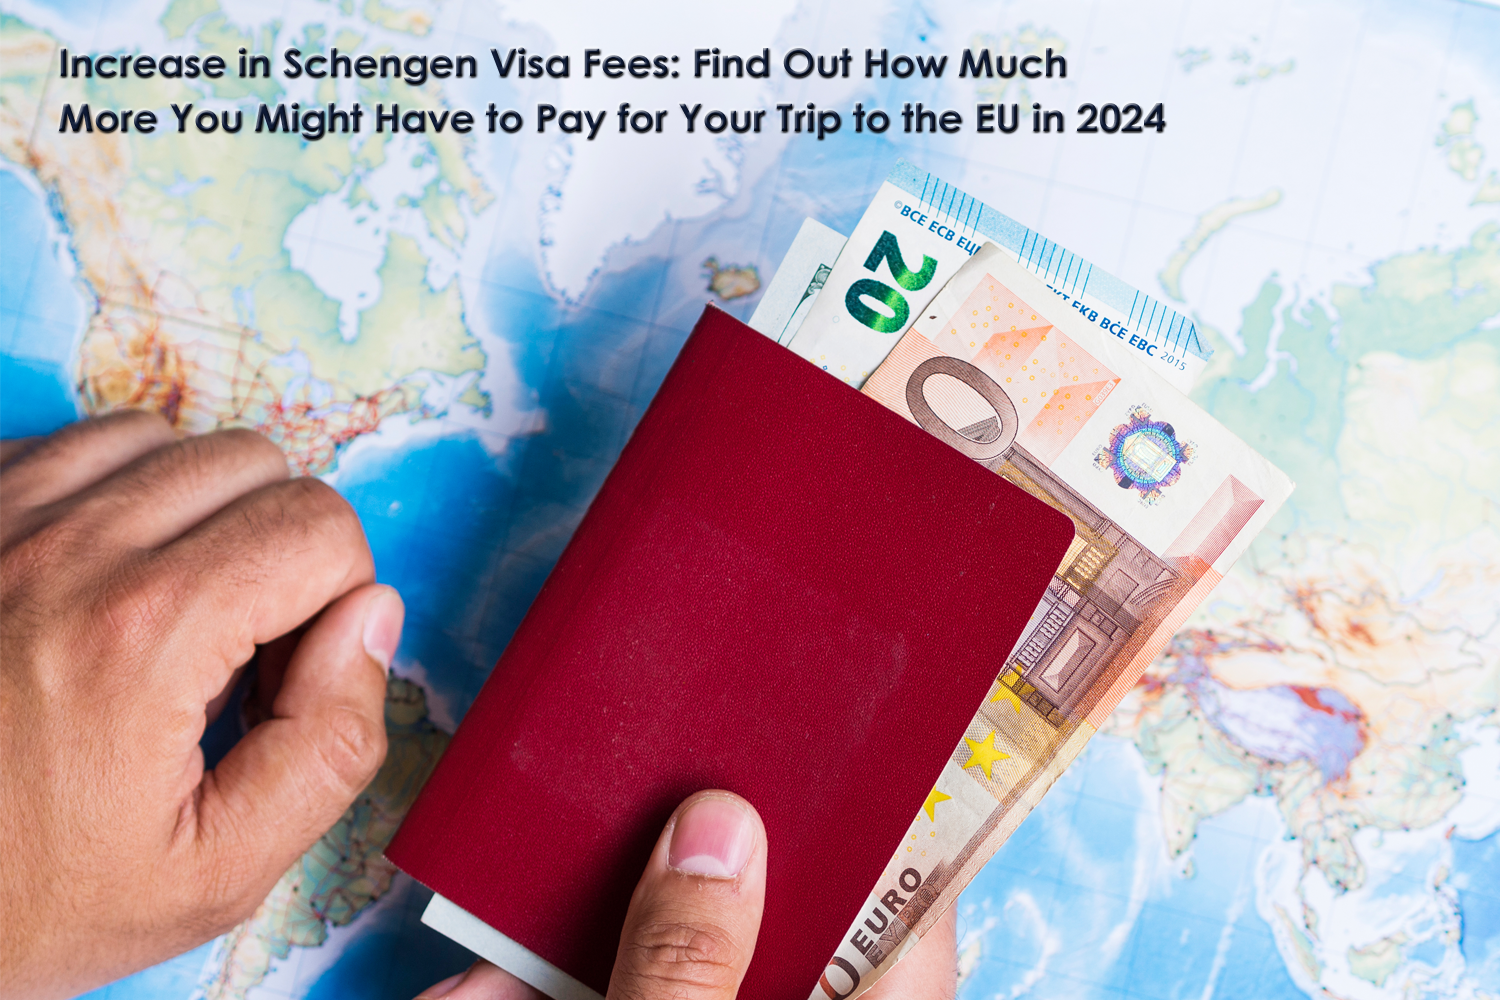 Increase in Schengen Visa Fees: Find Out How Much More You Might Have to Pay for Your Trip to the EU in 2024